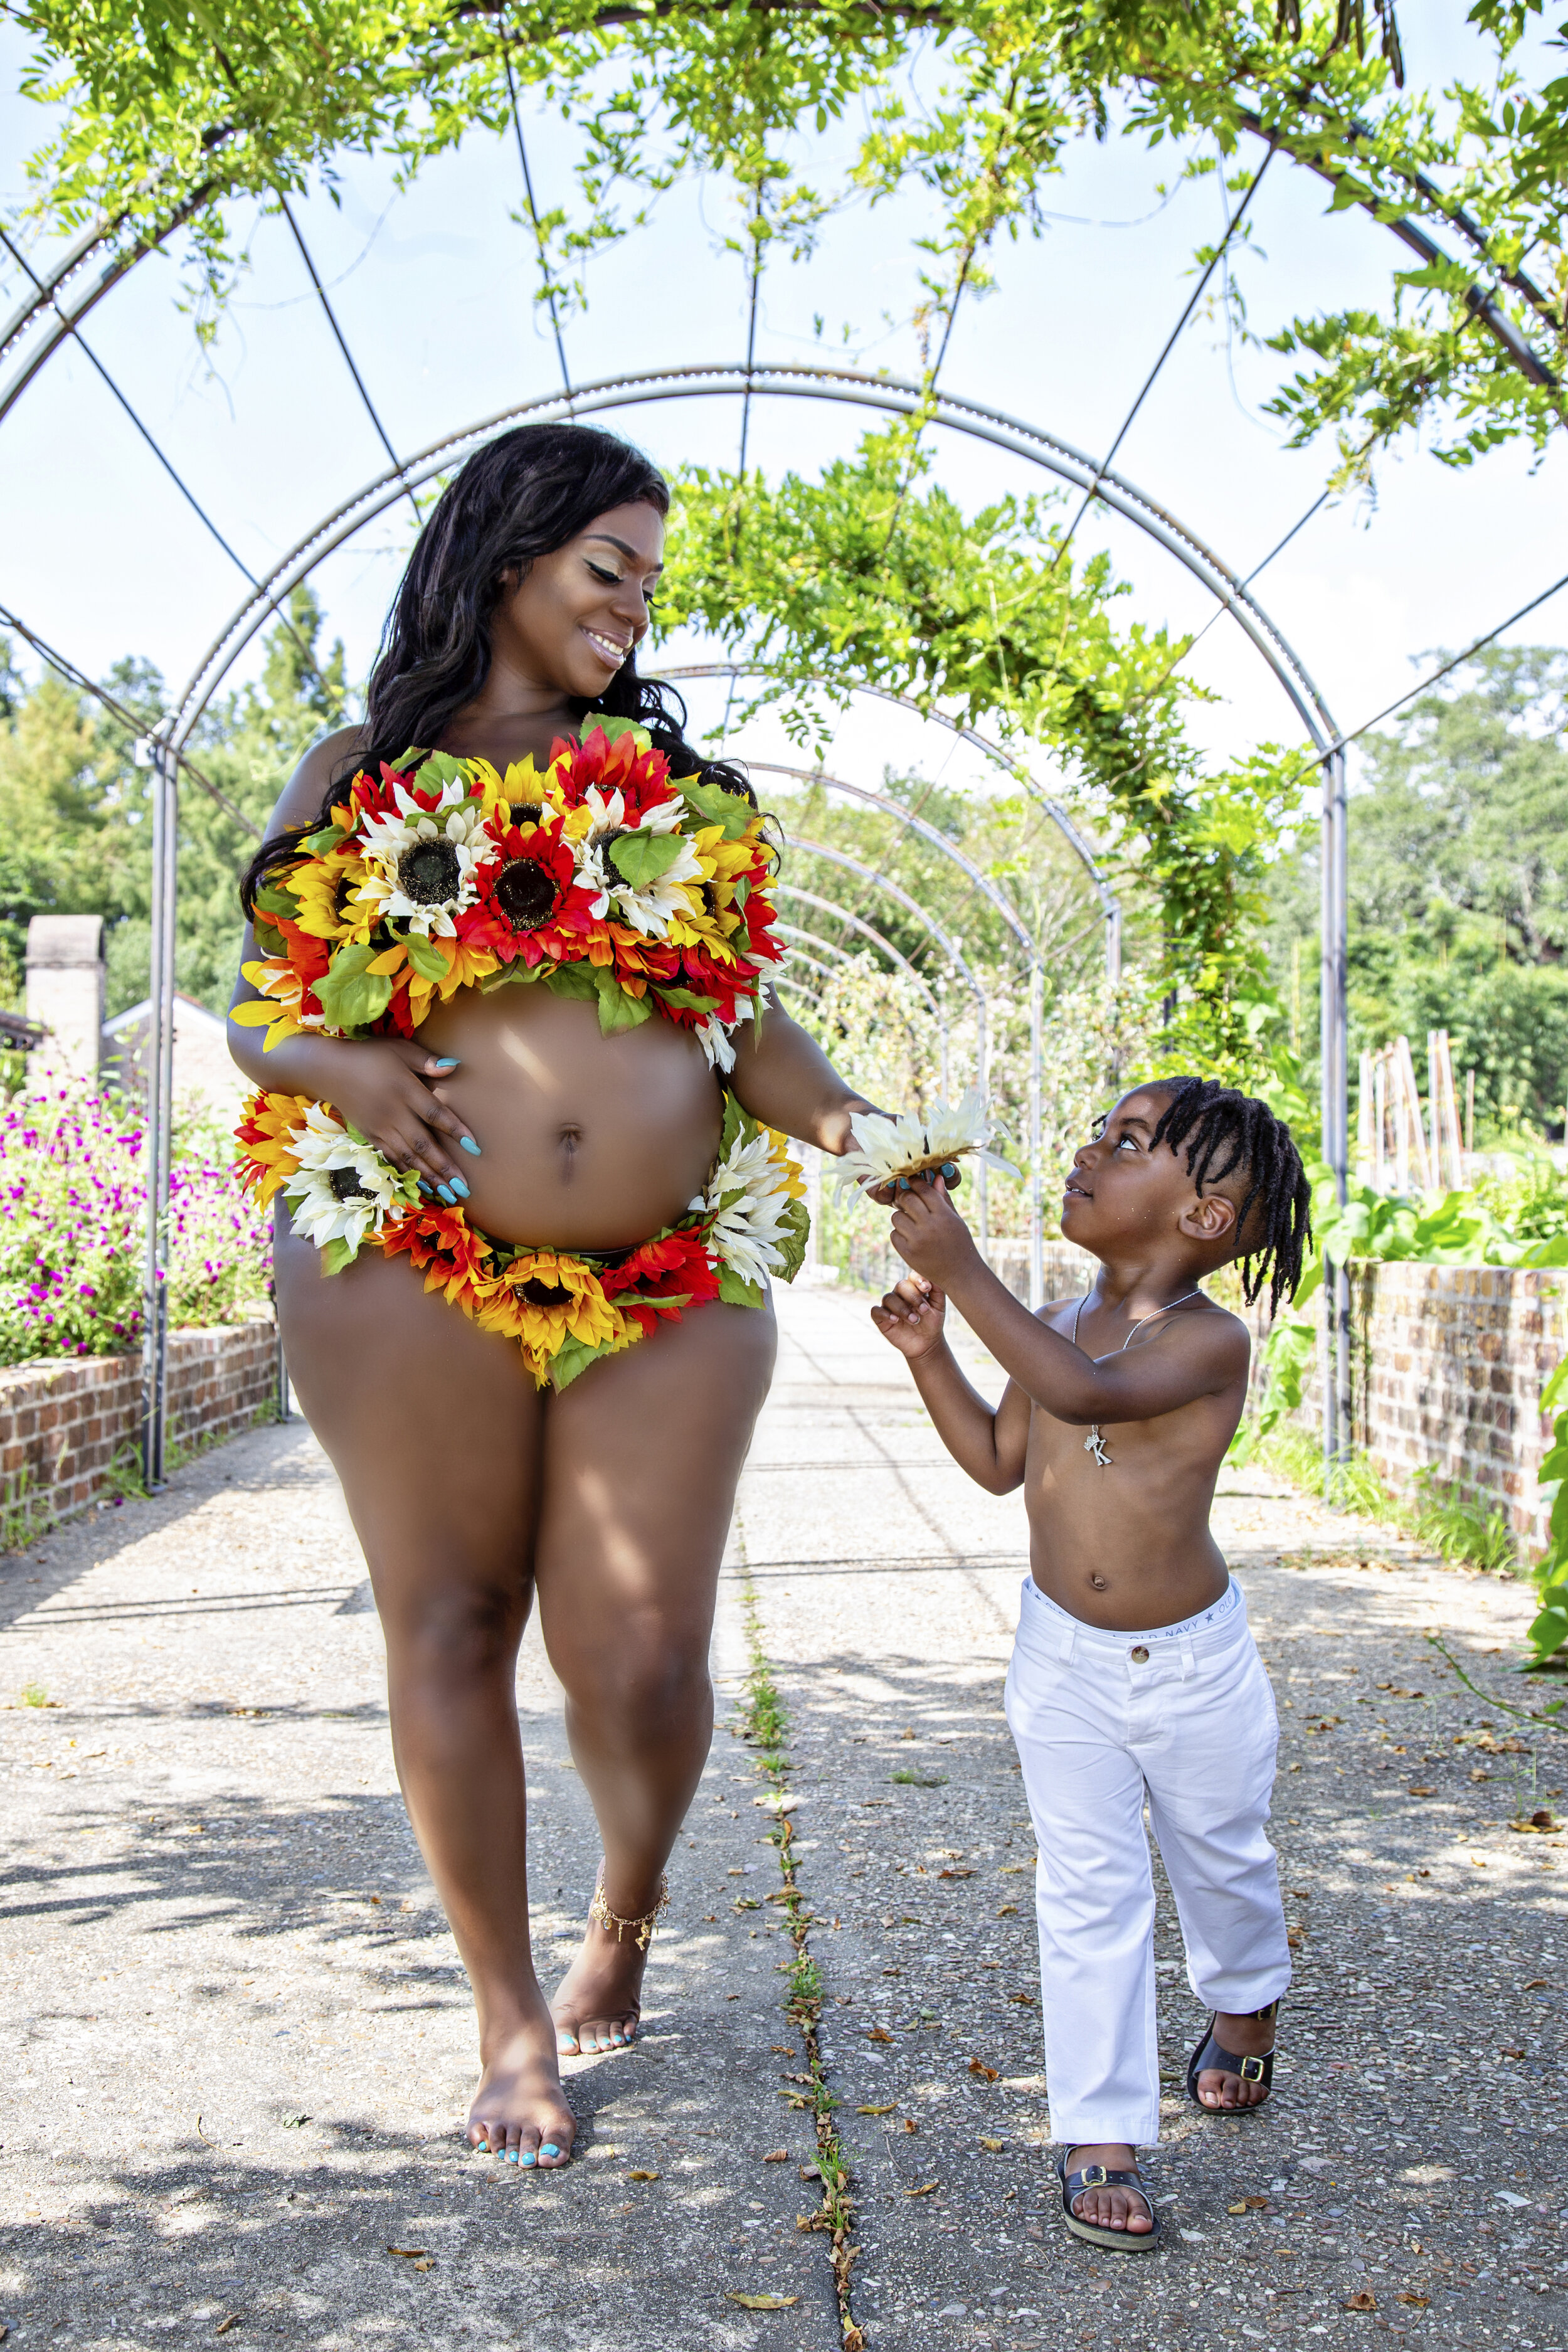 Expectant mother Britt adorned with a sunflower ensemble, sharing a natural moment with her son at New Orleans Botanical Garden